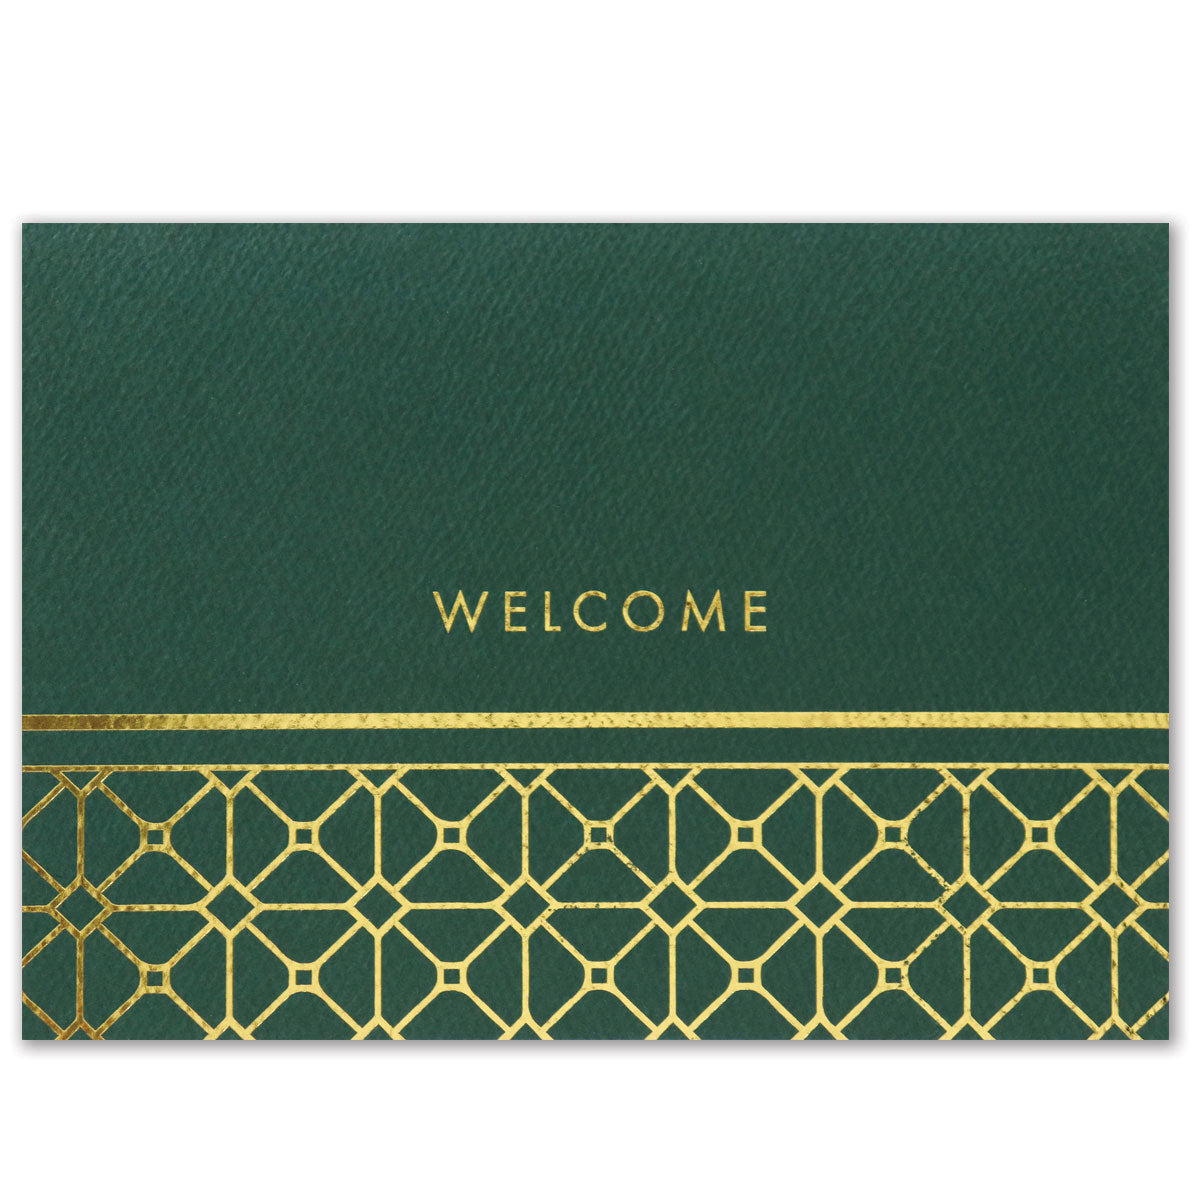 Textured green felt welcome card with gold foil lattice design